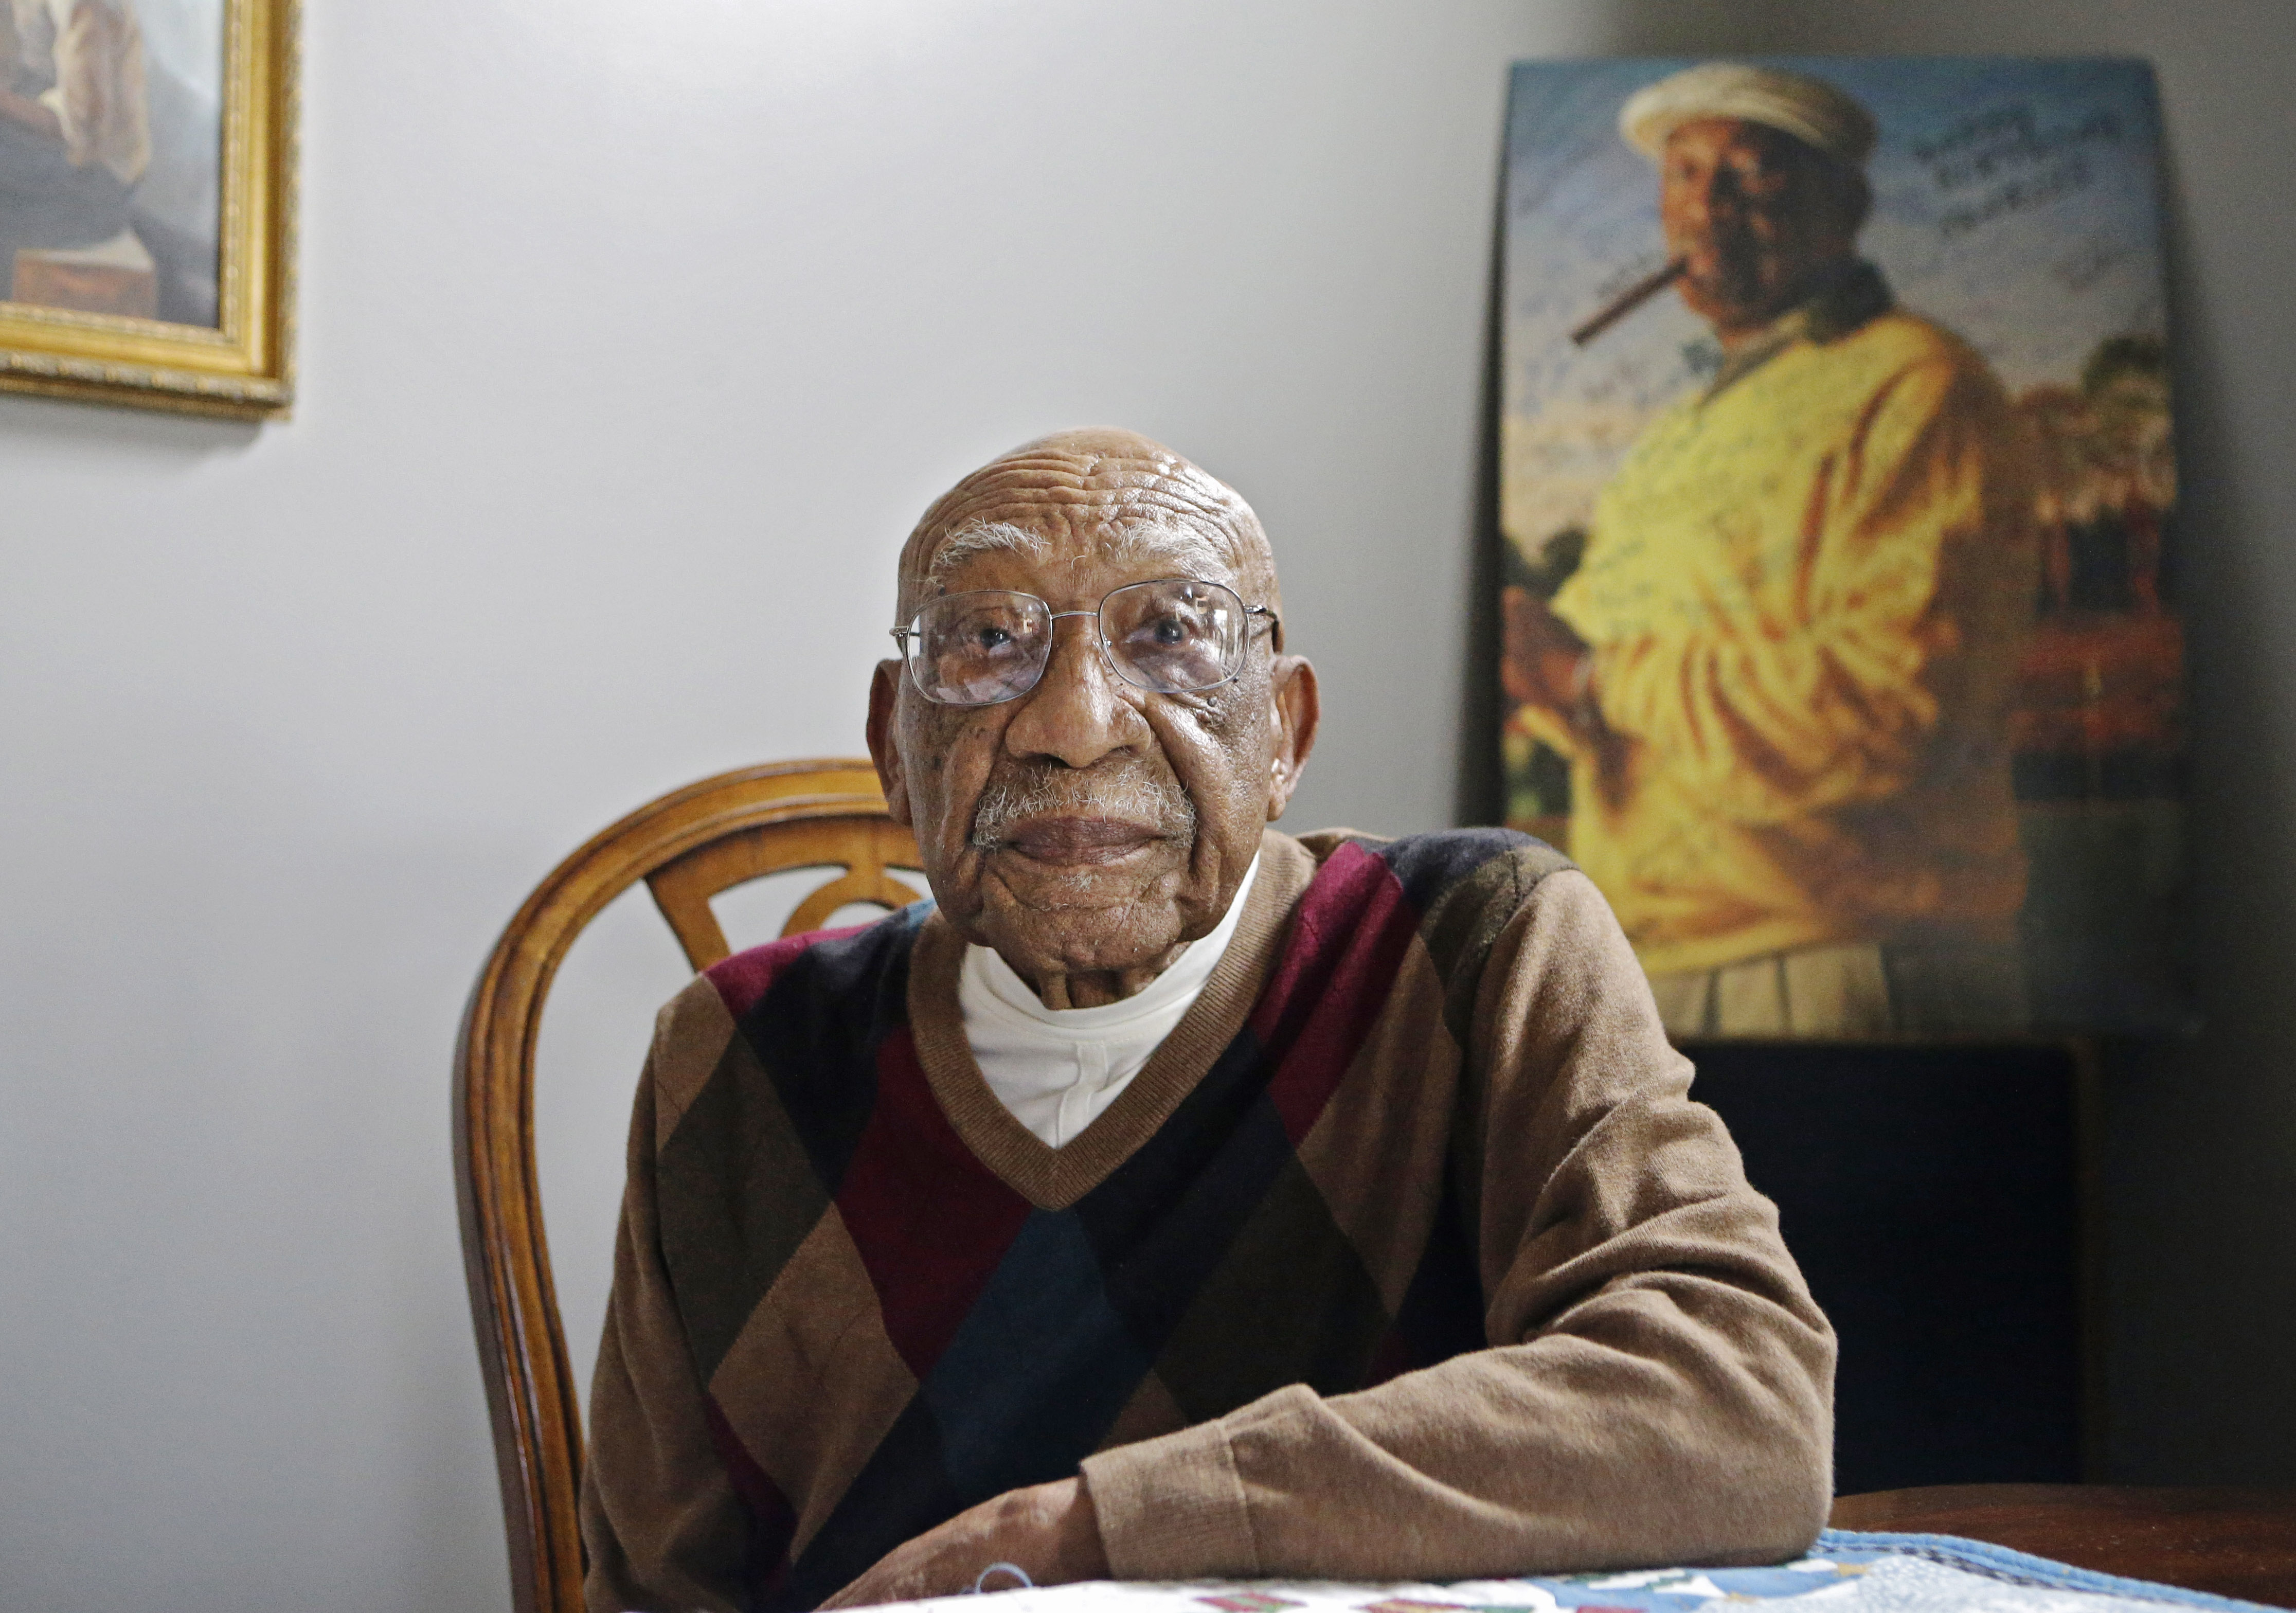 Former PGA golfer Charlie Sifford sits in the dining room of his home in Brecksville, Ohio on Nov. 13, 2014.